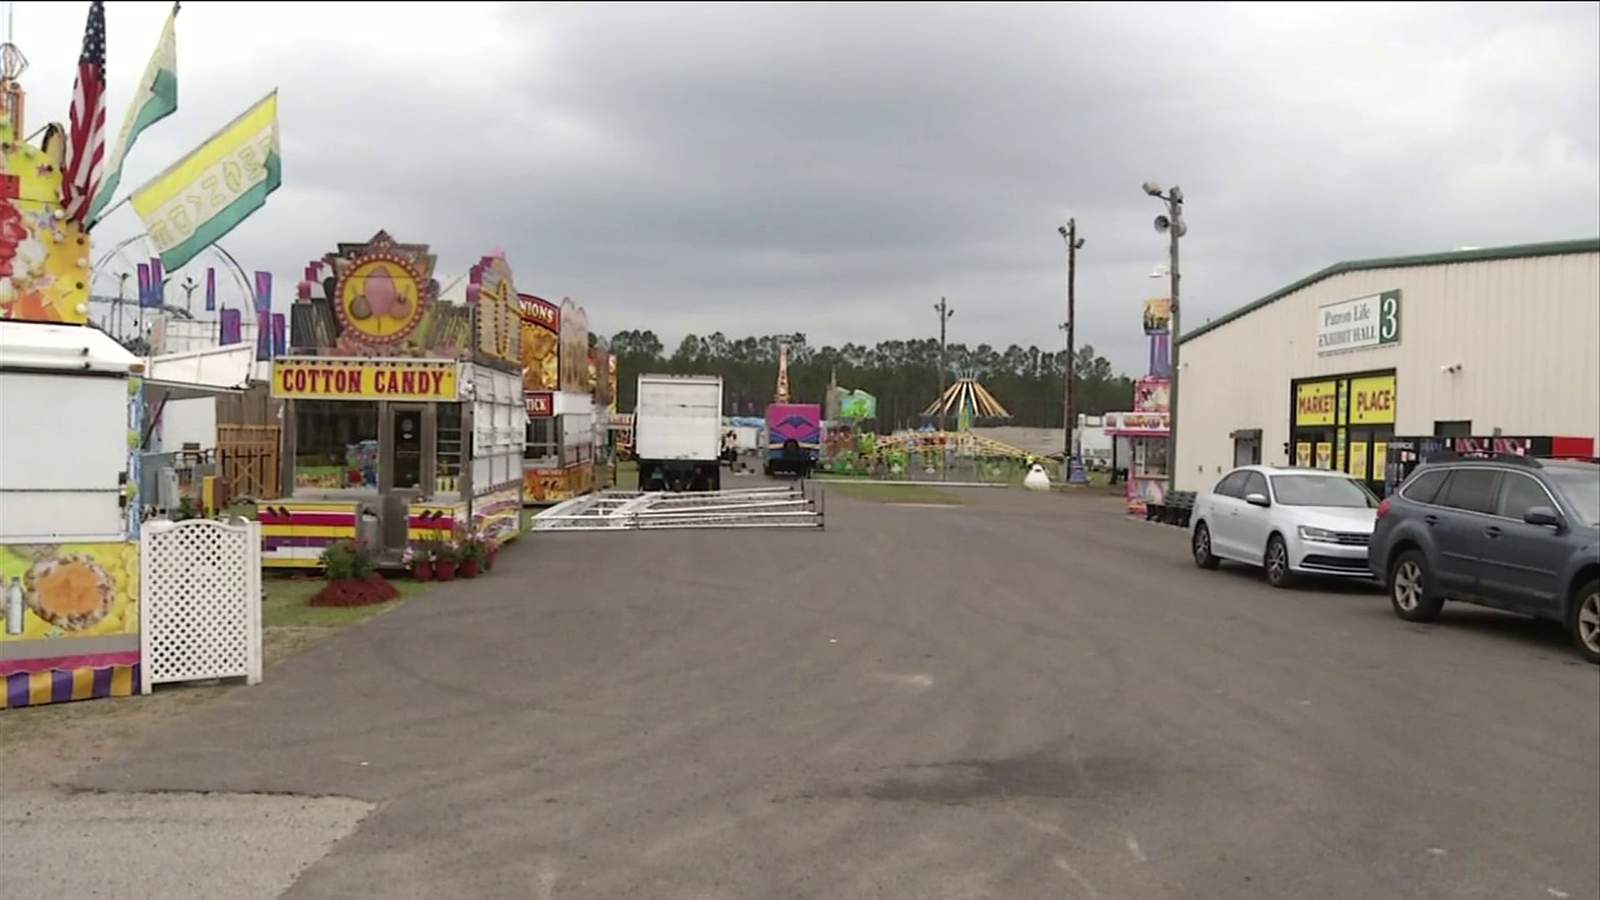 Clay County Fair returns with full capacity, safety protocols in place